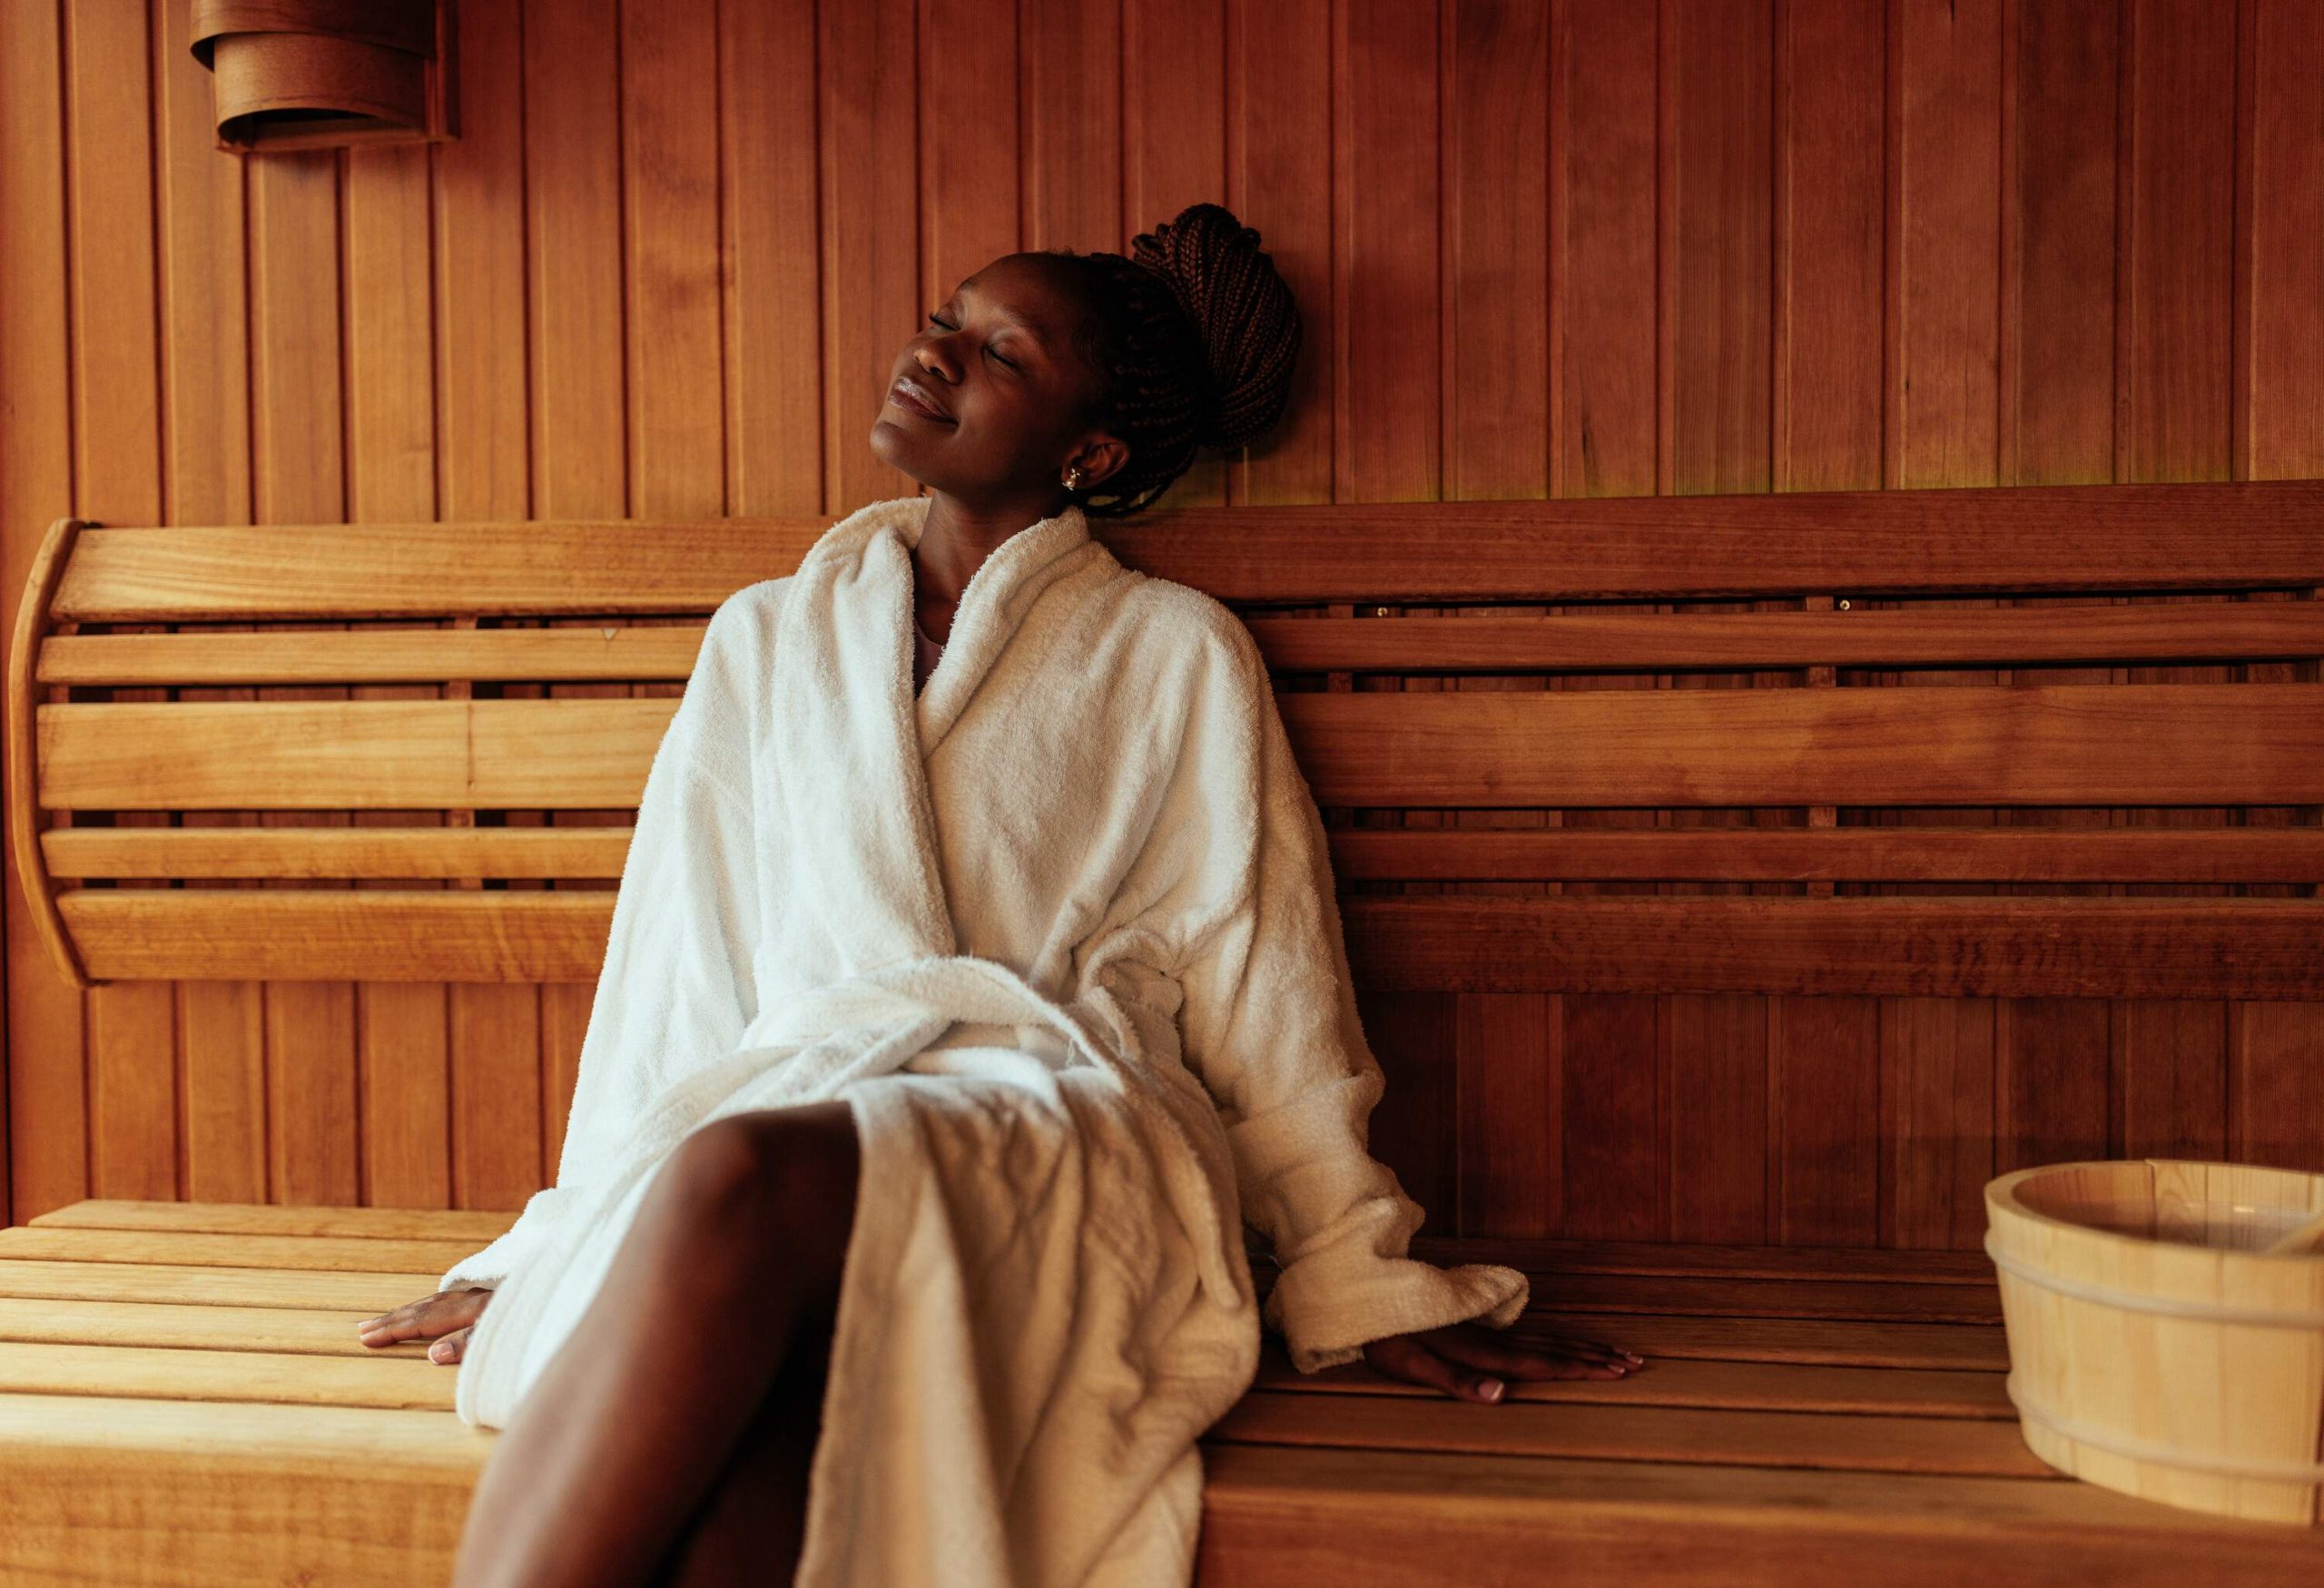 A young black woman is sitting on the bench in the sauna wearing her bathrobe.